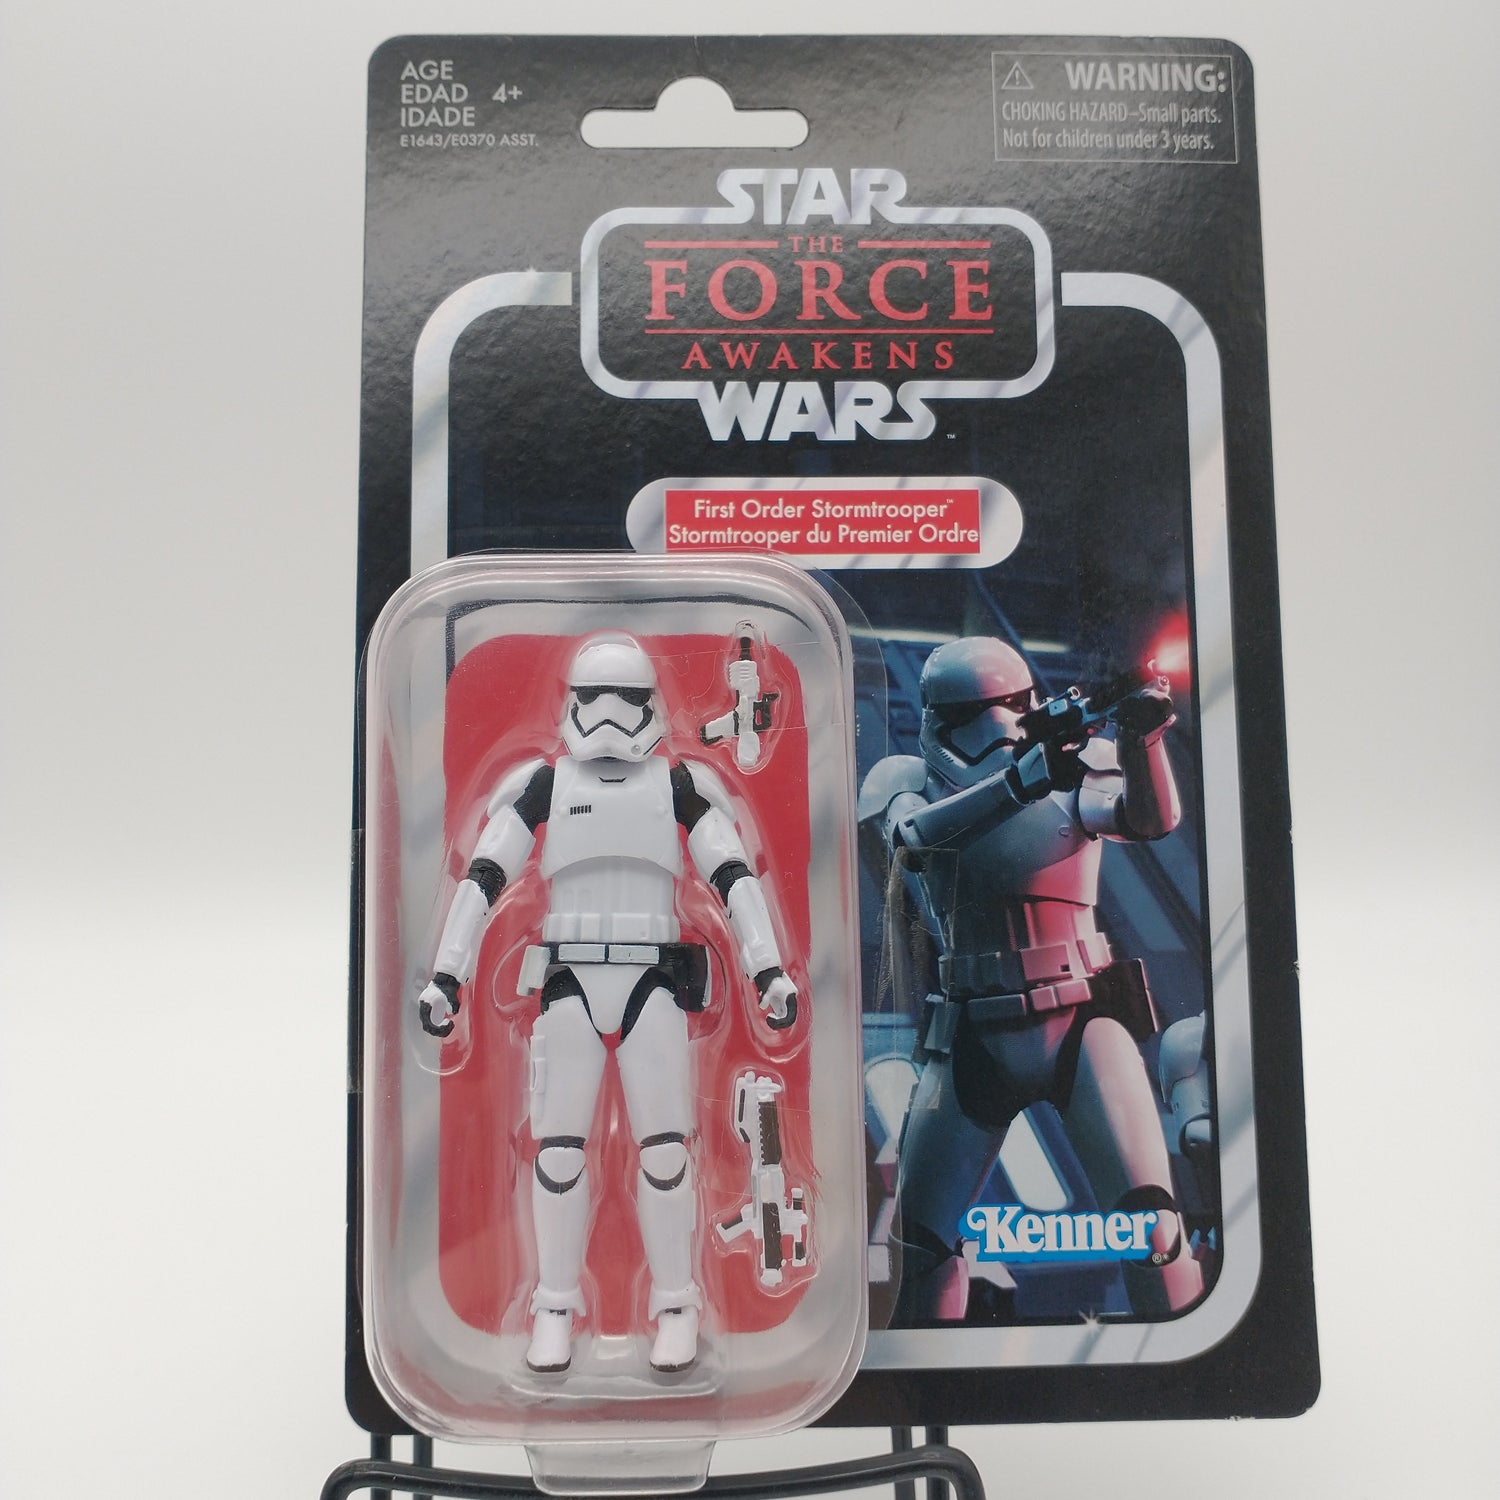 The front of the cart and bubble are intact. The action figure inside is wearing white combat armor. There are two guns in the bubble next to him.